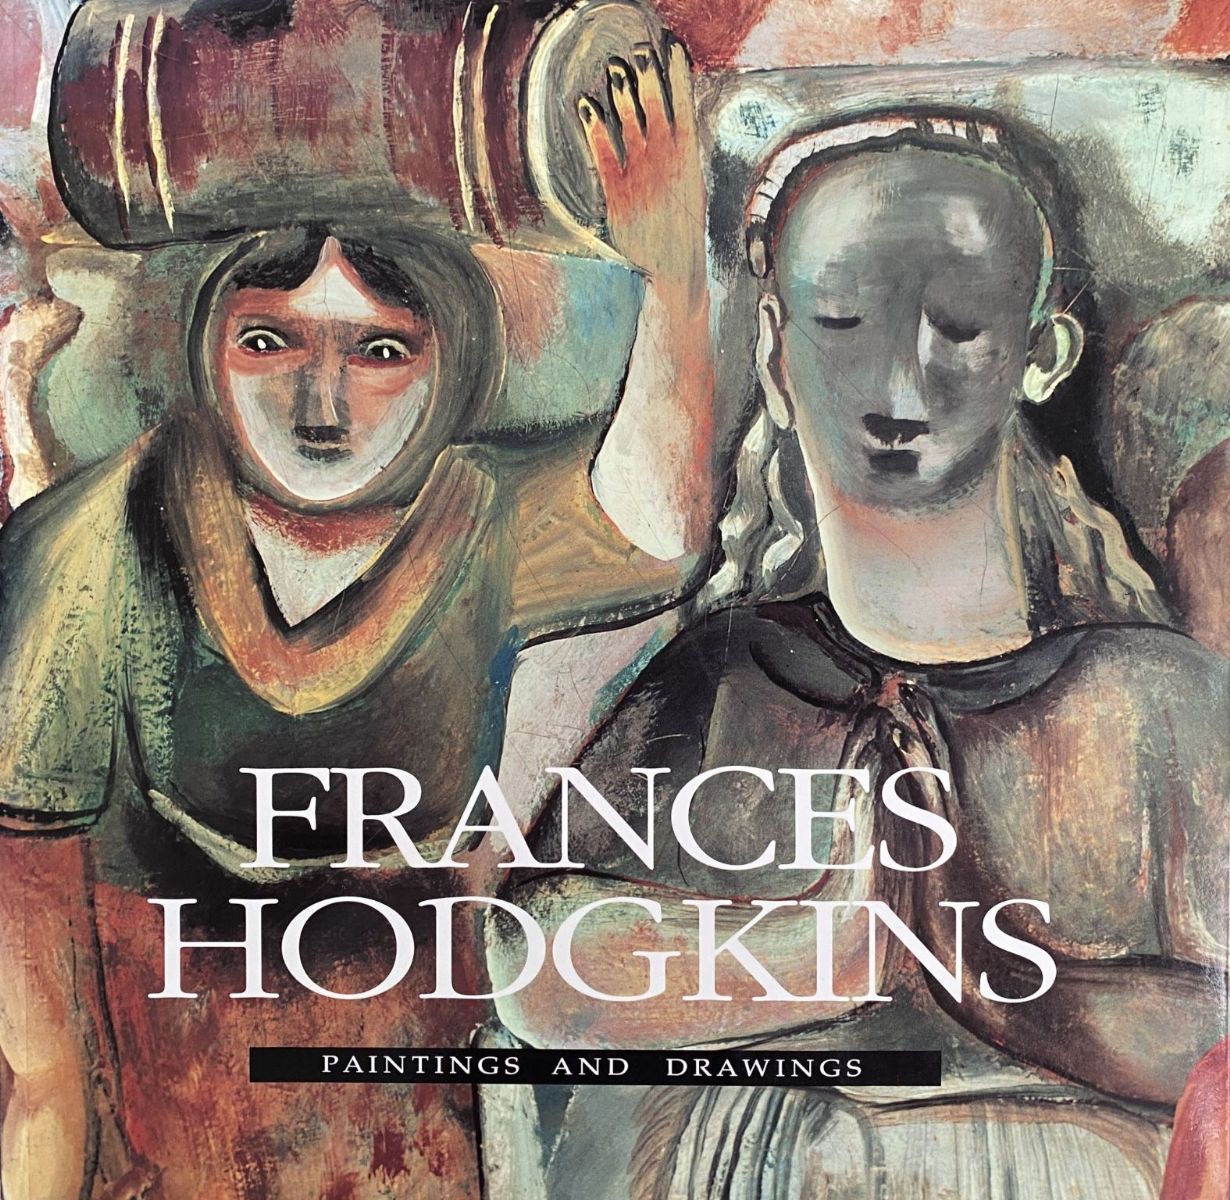 FRANCES HODGKINS: Paintings and Drawings